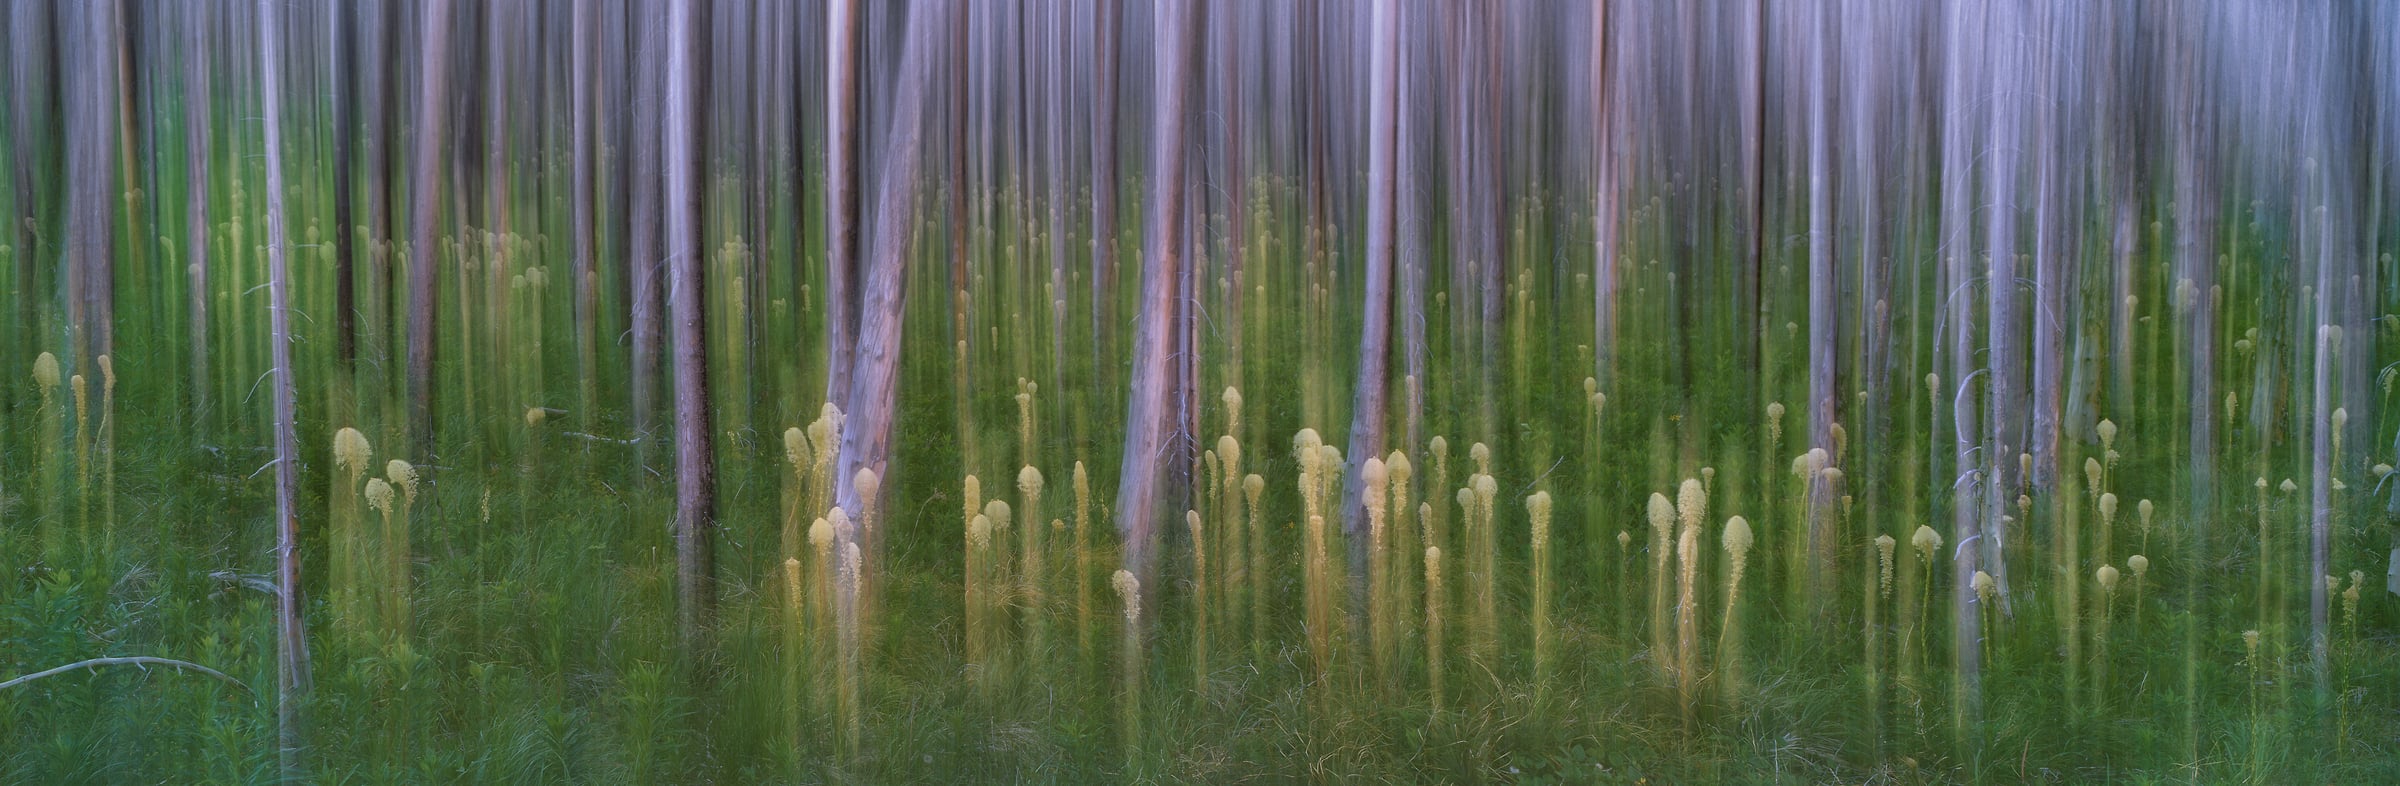 328 megapixels! A very high resolution, large-format VAST photo print of a dreamy abstract forest scene; fine art photograph created by Scott Dimond in Waterton National Park, Alberta, Canada.